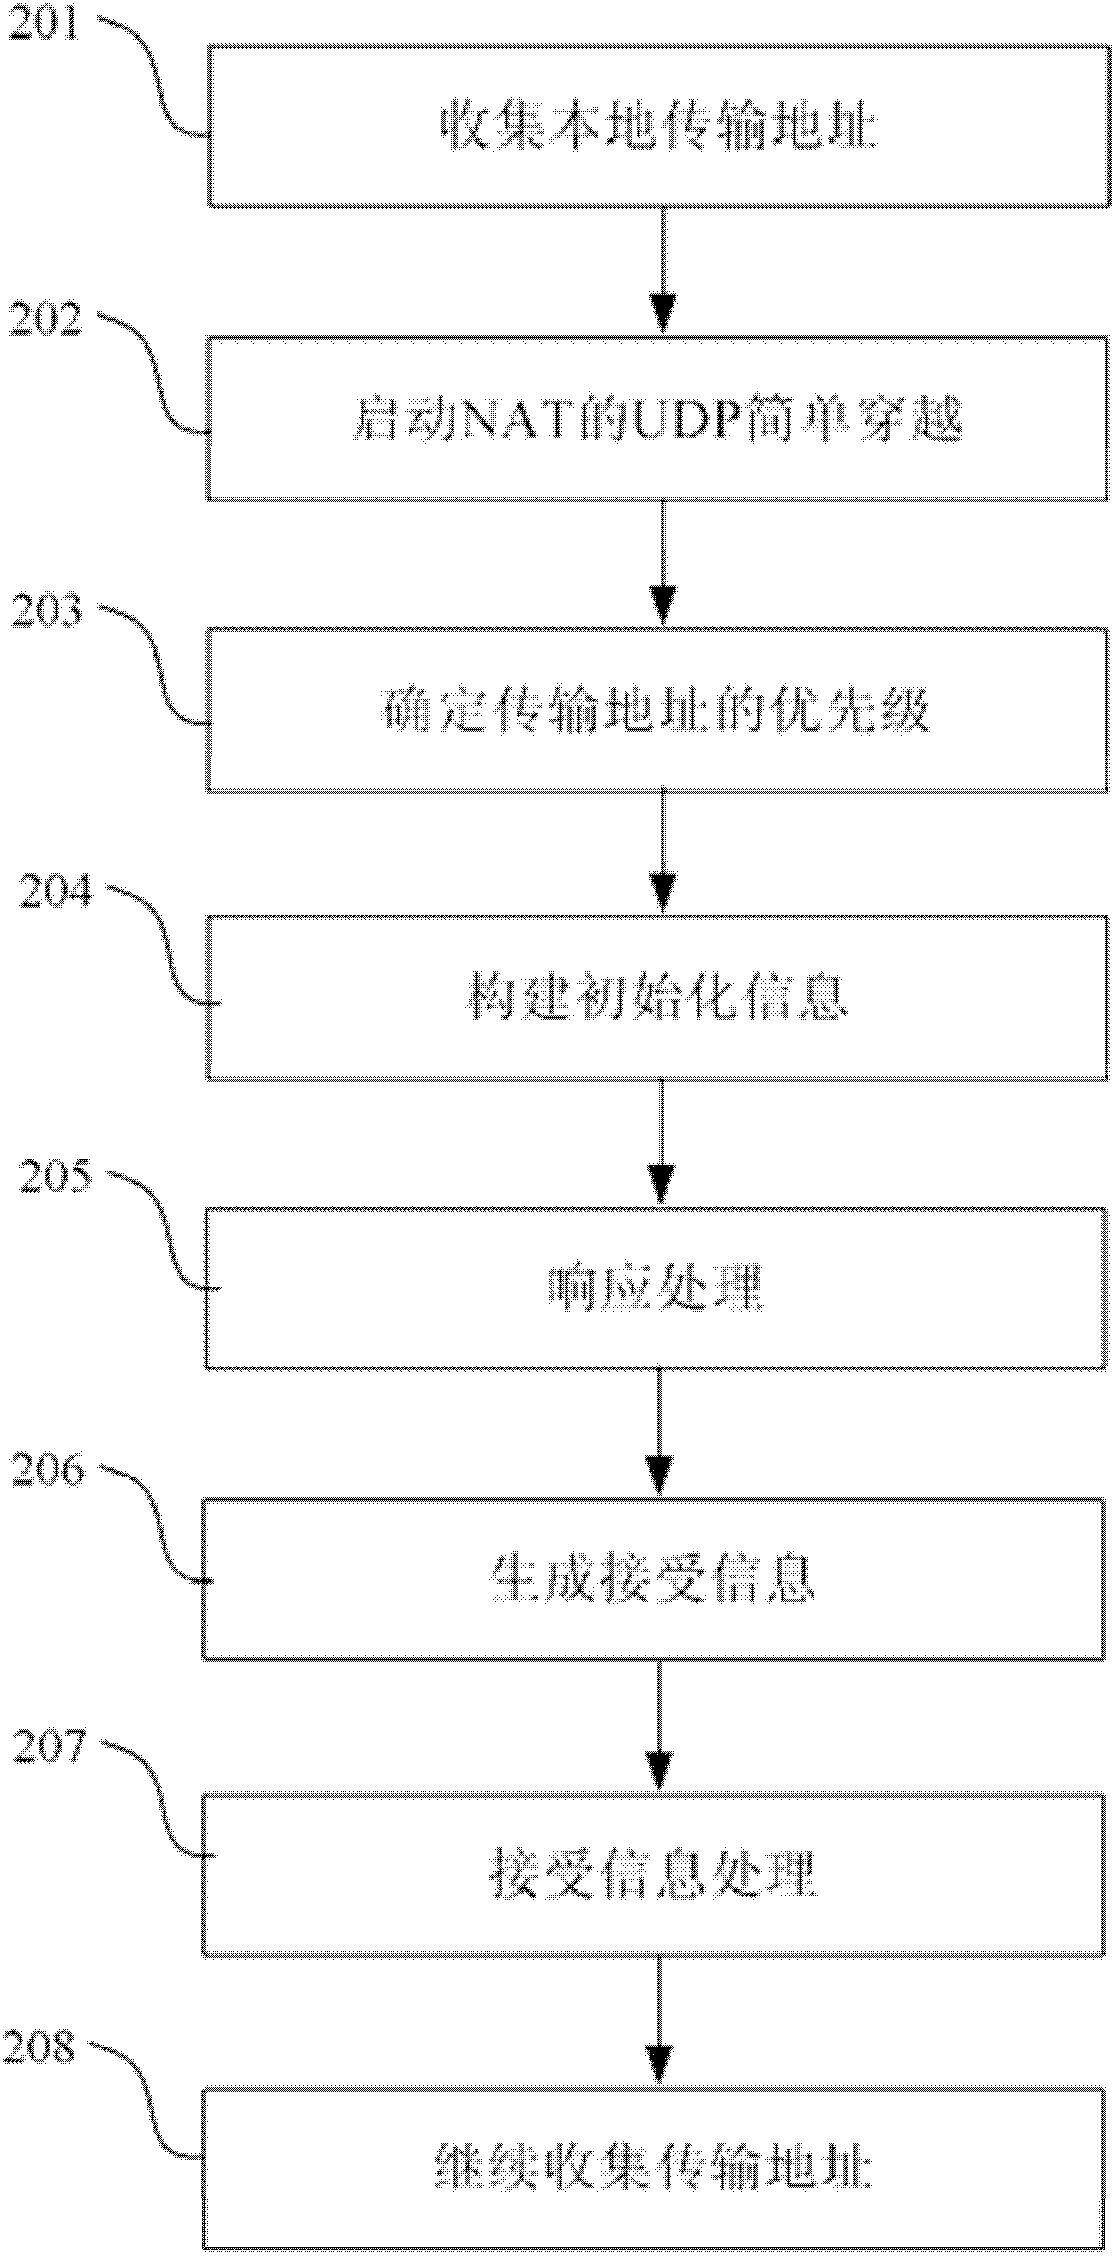 Method for session initiation protocol (SIP) terminal to pass through firewall